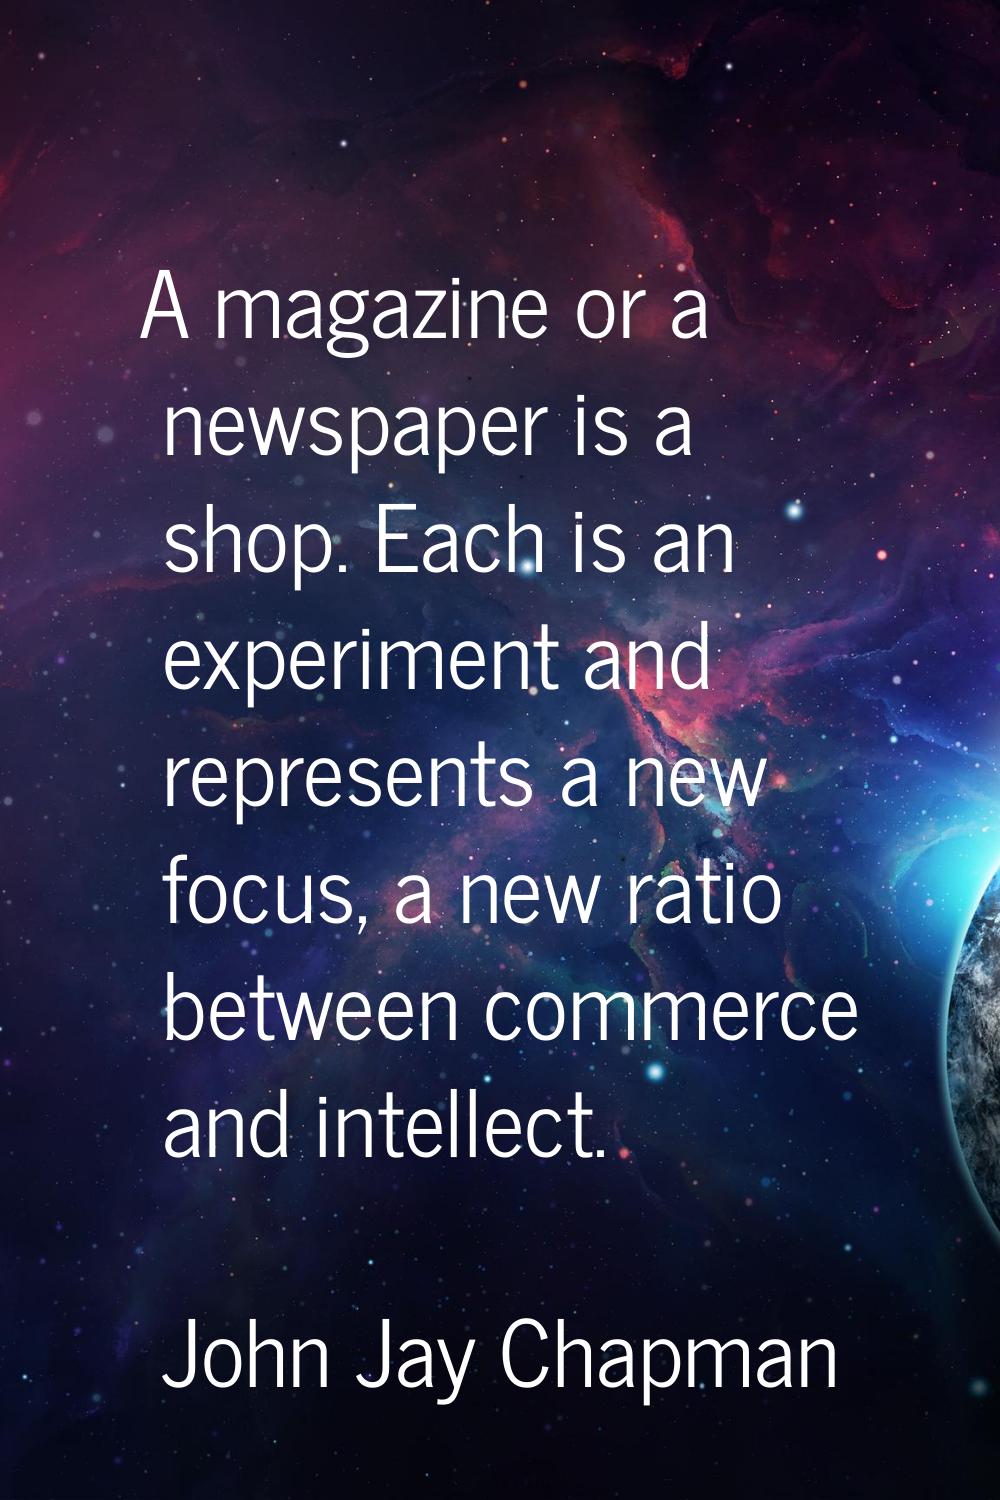 A magazine or a newspaper is a shop. Each is an experiment and represents a new focus, a new ratio 